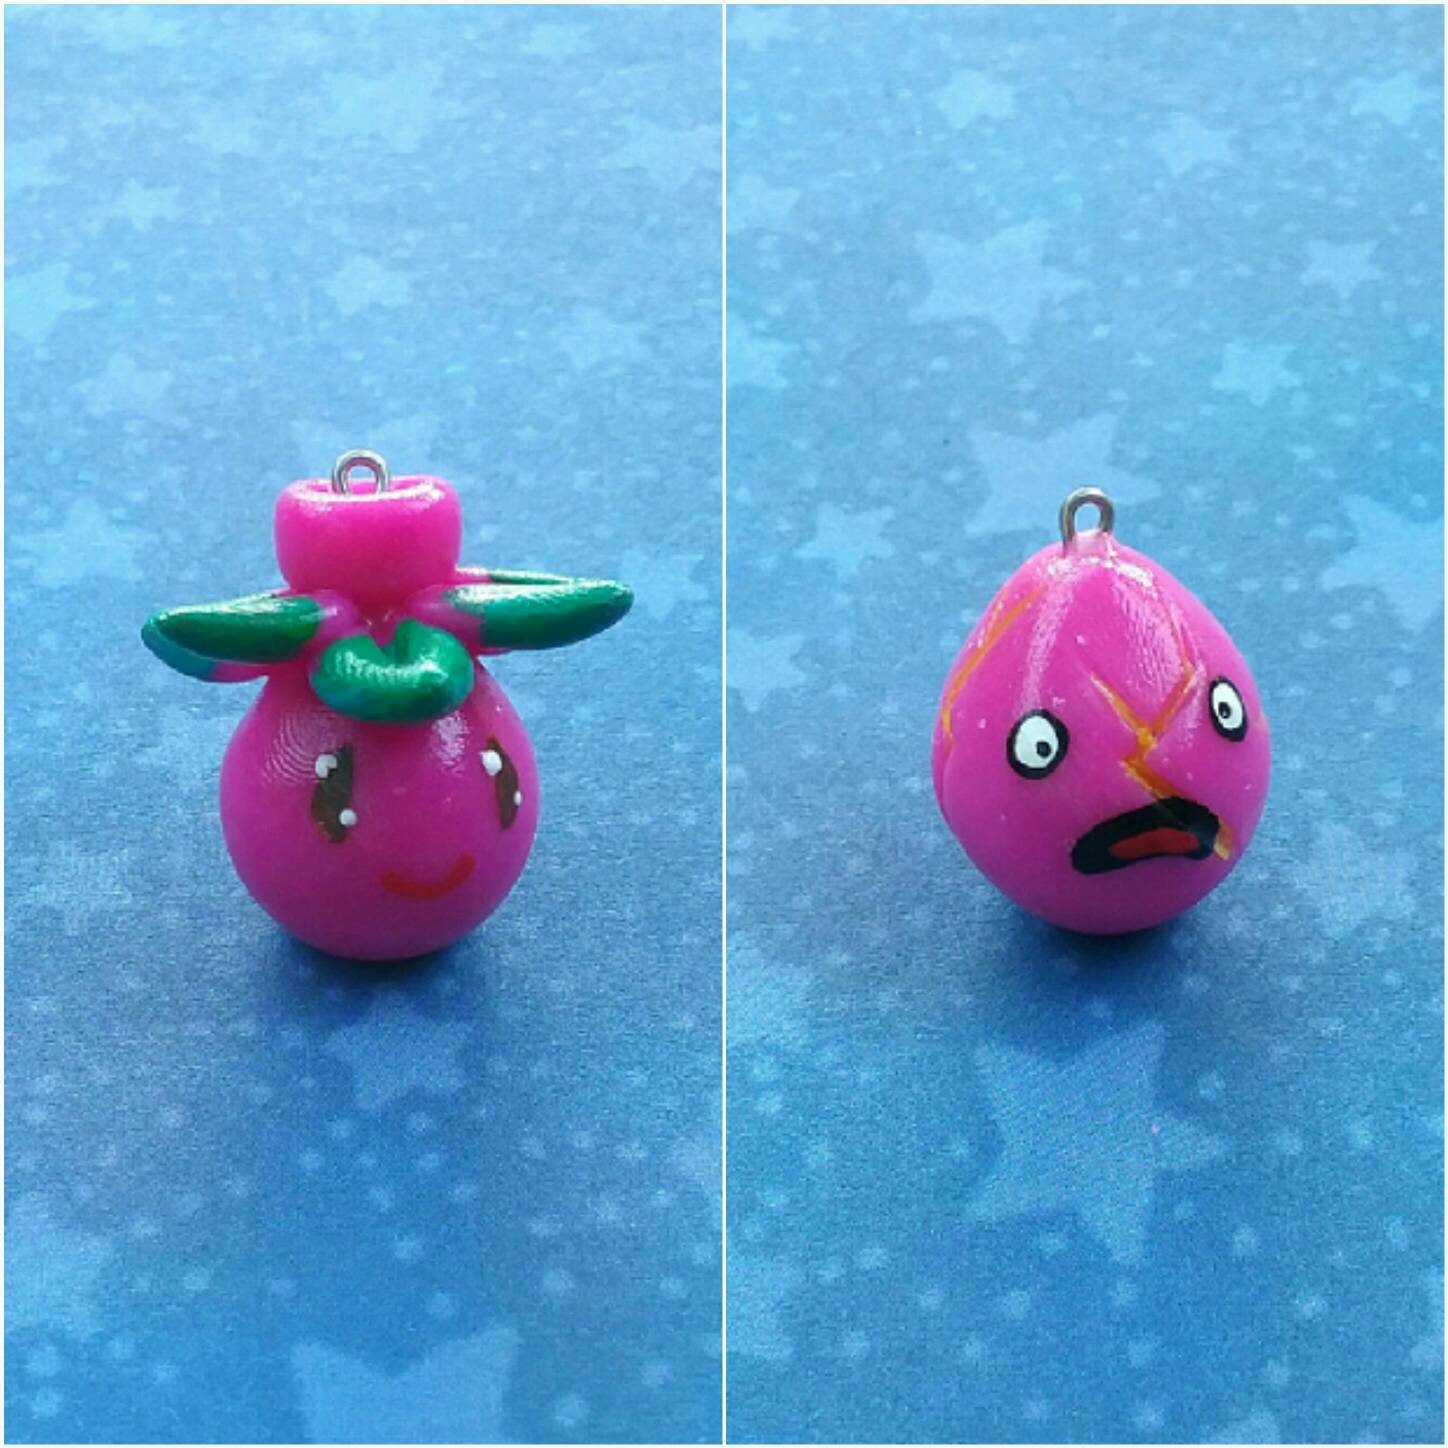 Ranch Slime Inspired Charms Large Slimes pink Slime Charms Game